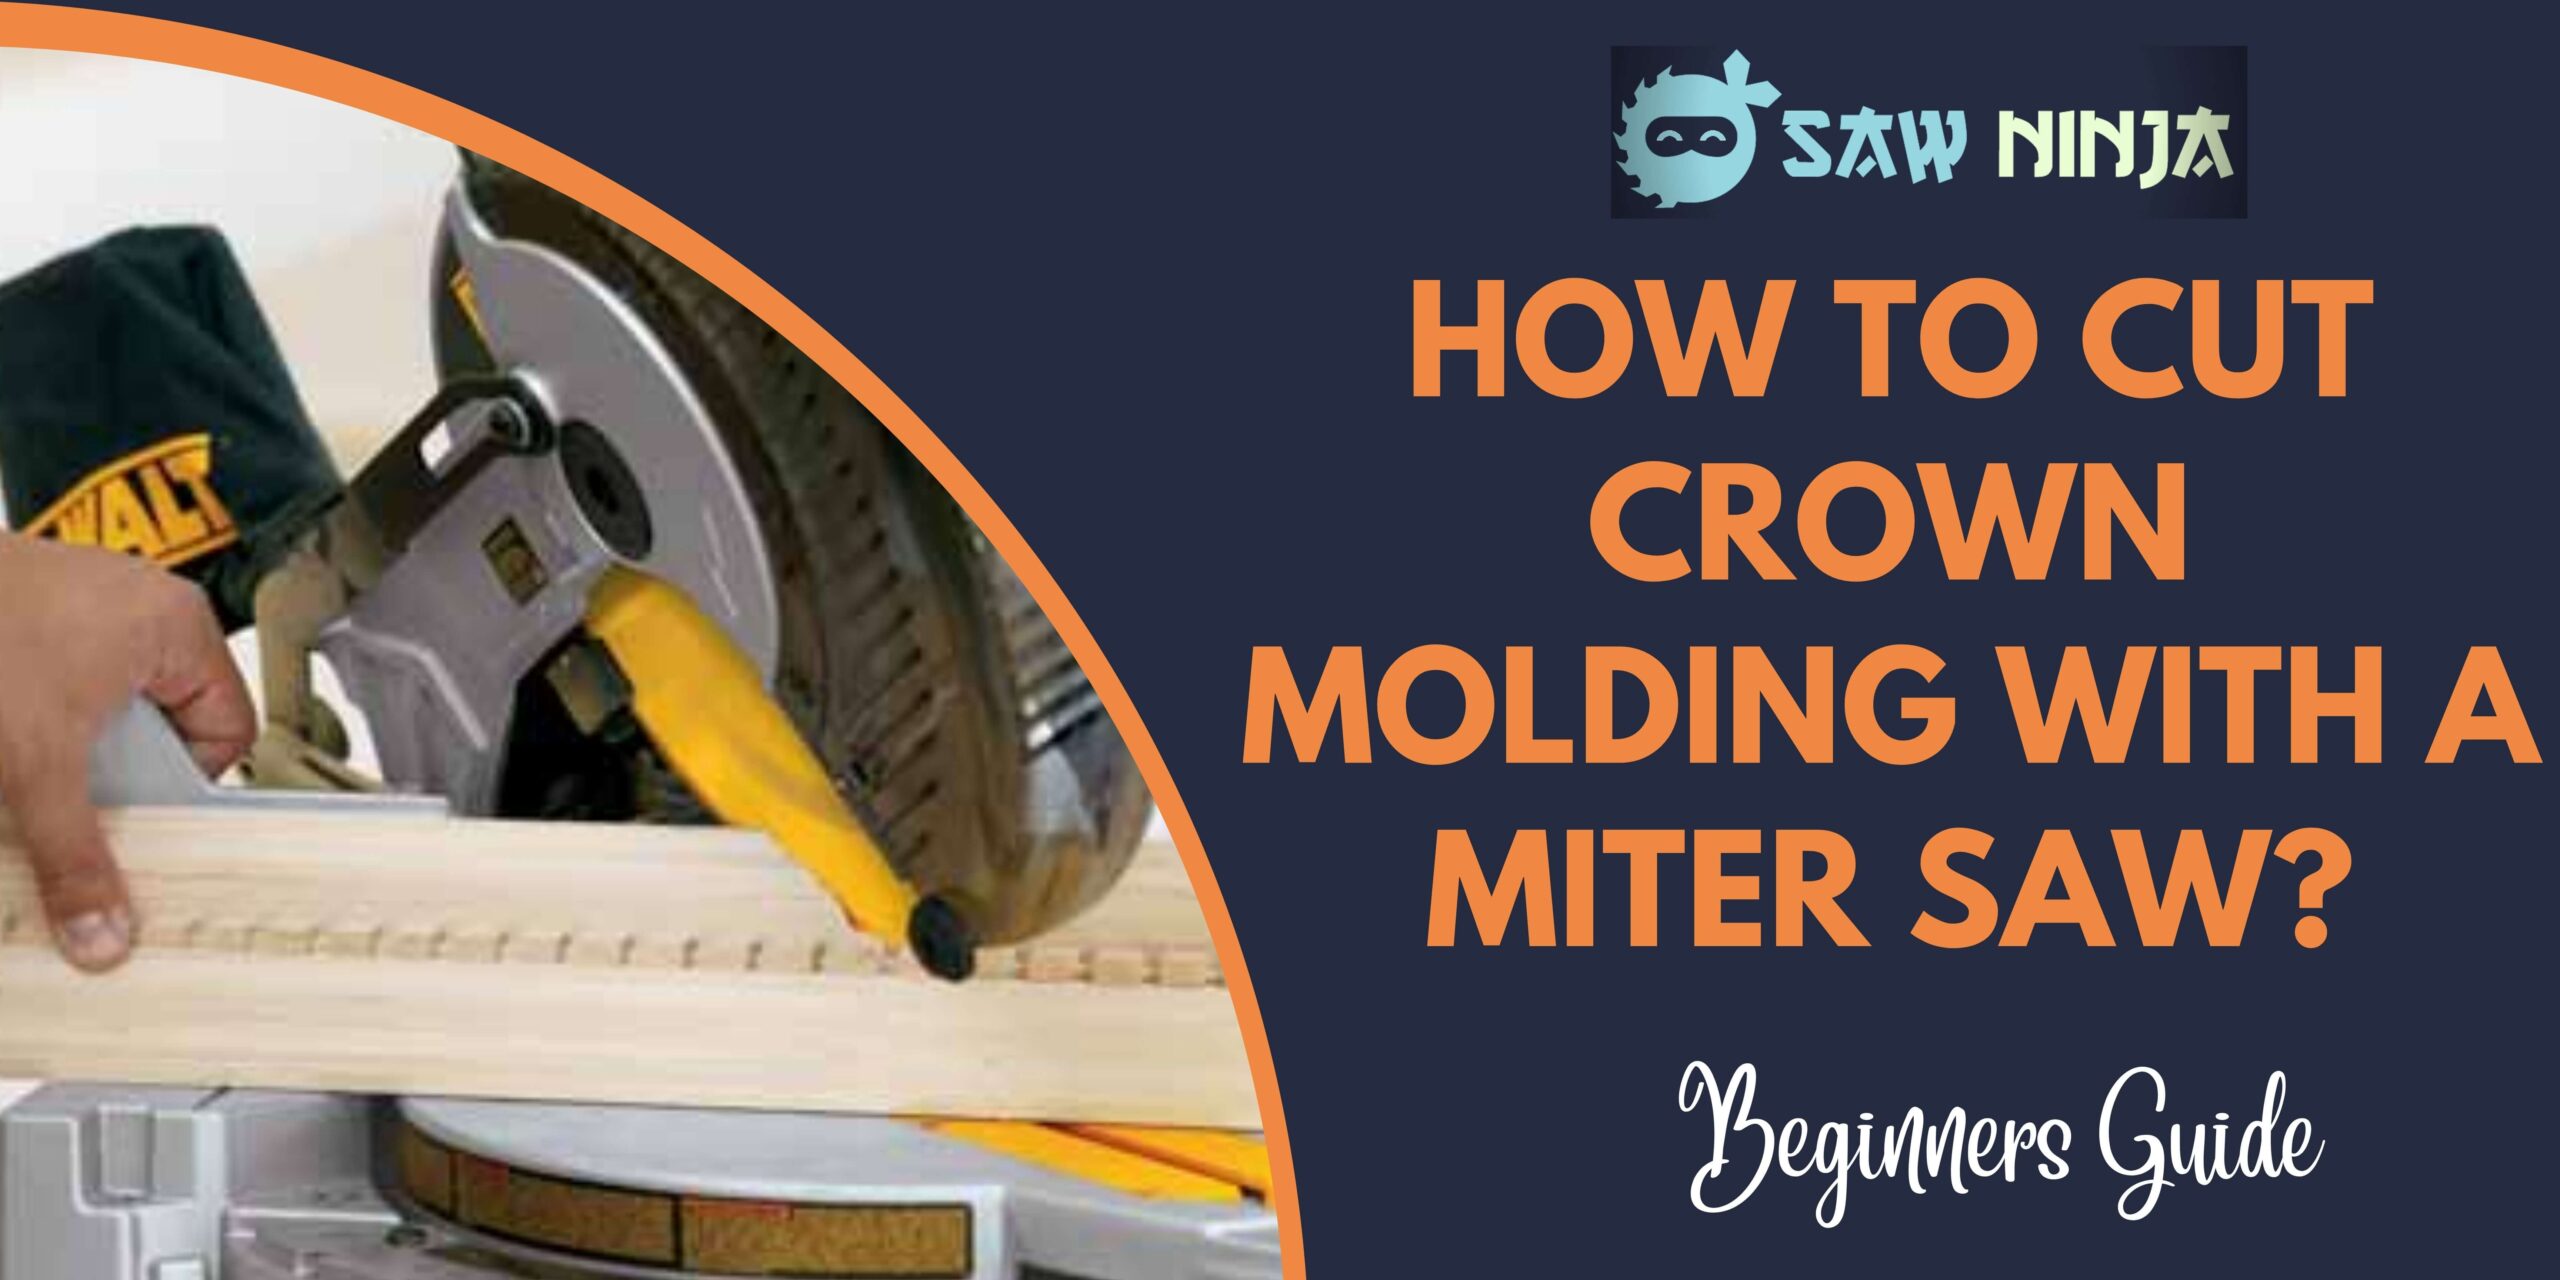 How to Cut Crown Molding With a Miter Saw